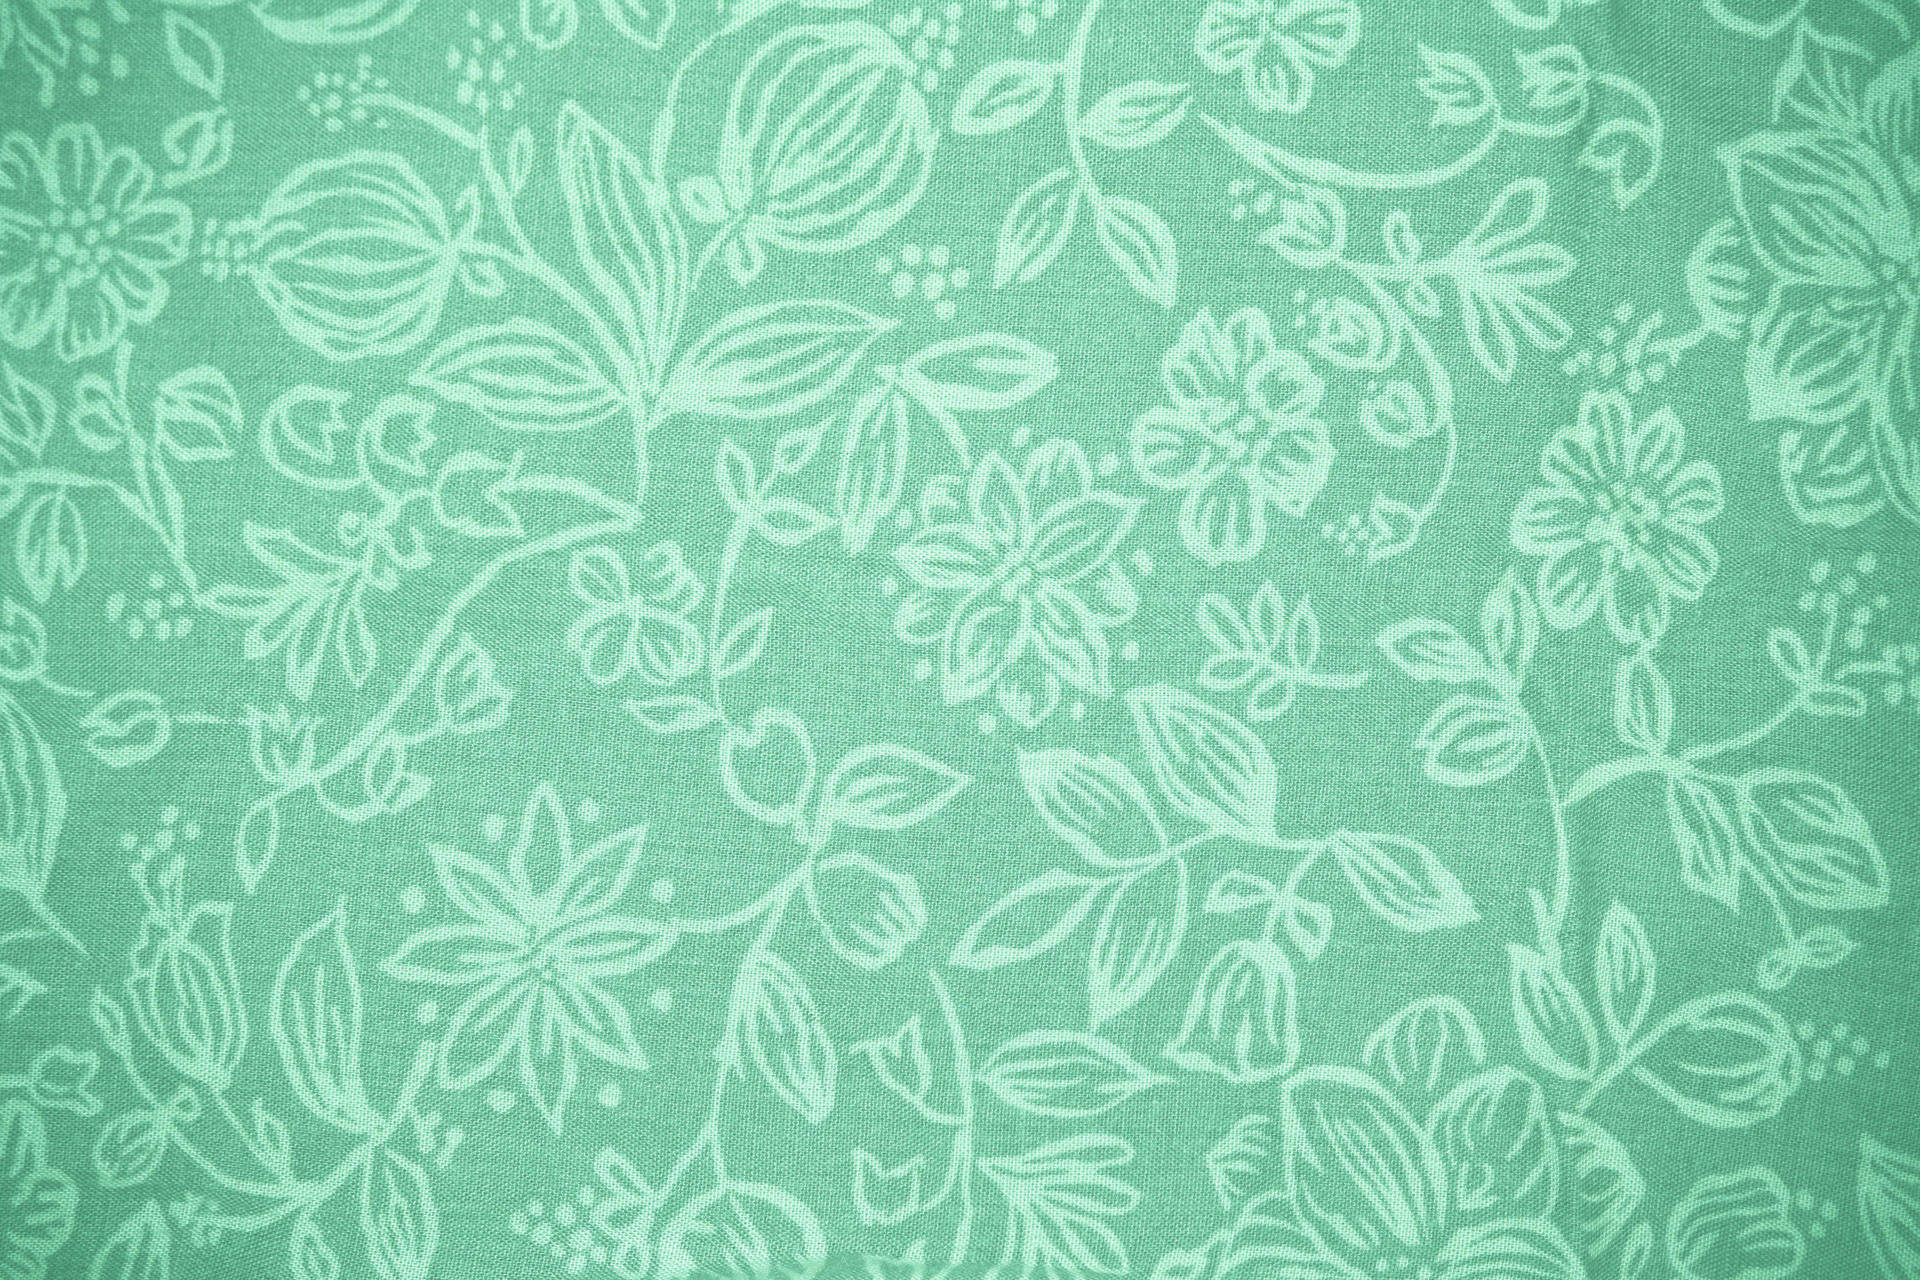 A close up of a green fabric with a white floral pattern. - Mint green